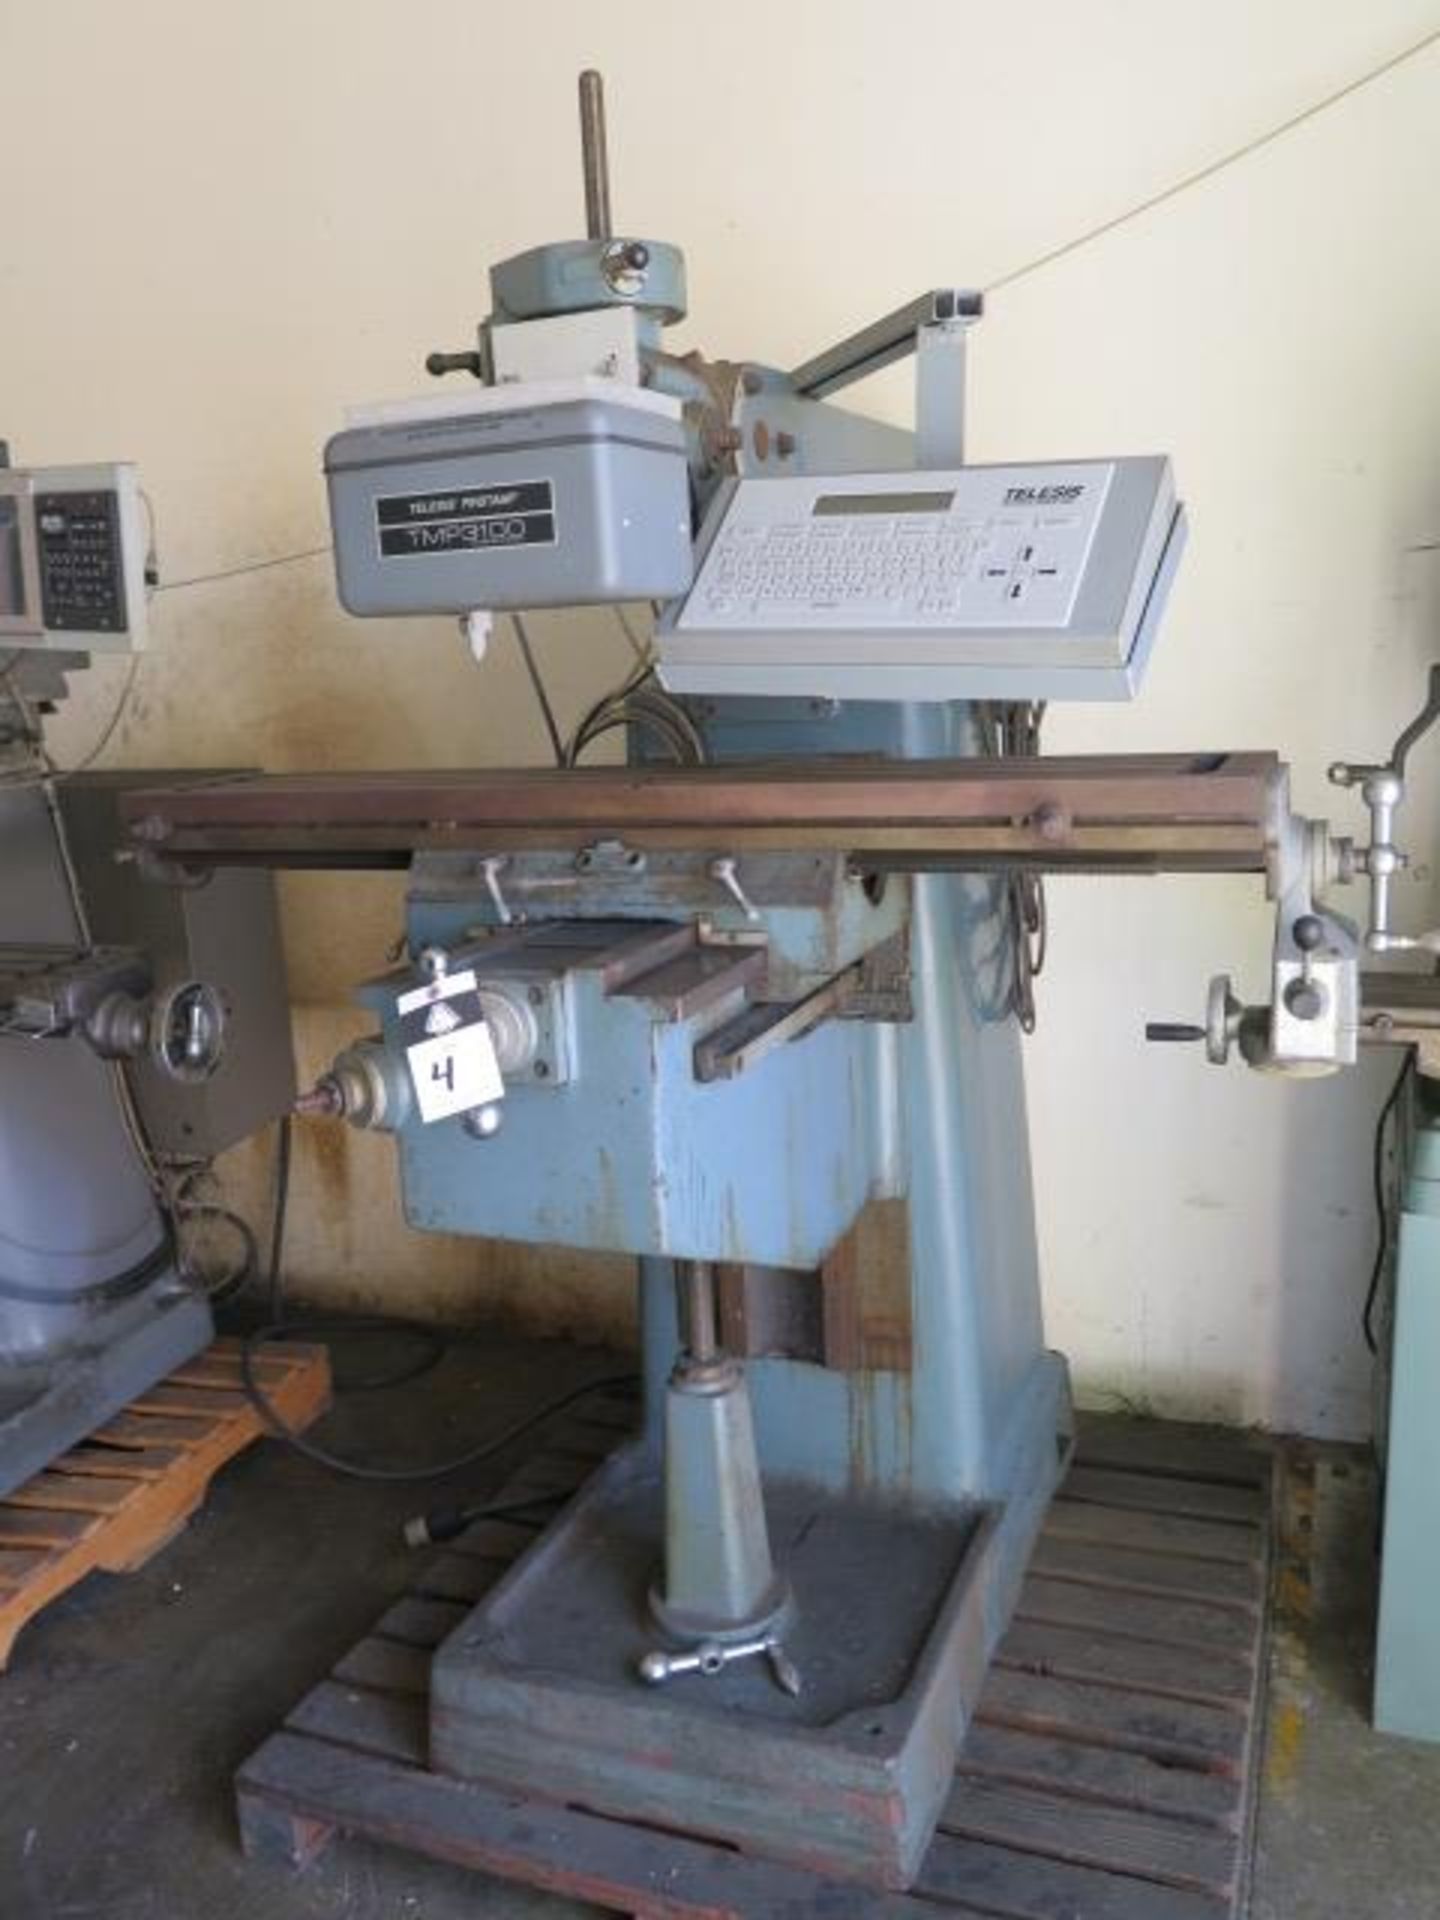 Telesis Pinstamp TMP3100 Pin Stamping Machine (On Vertical Mill Base) w/Telesis Controls, SOLD AS IS